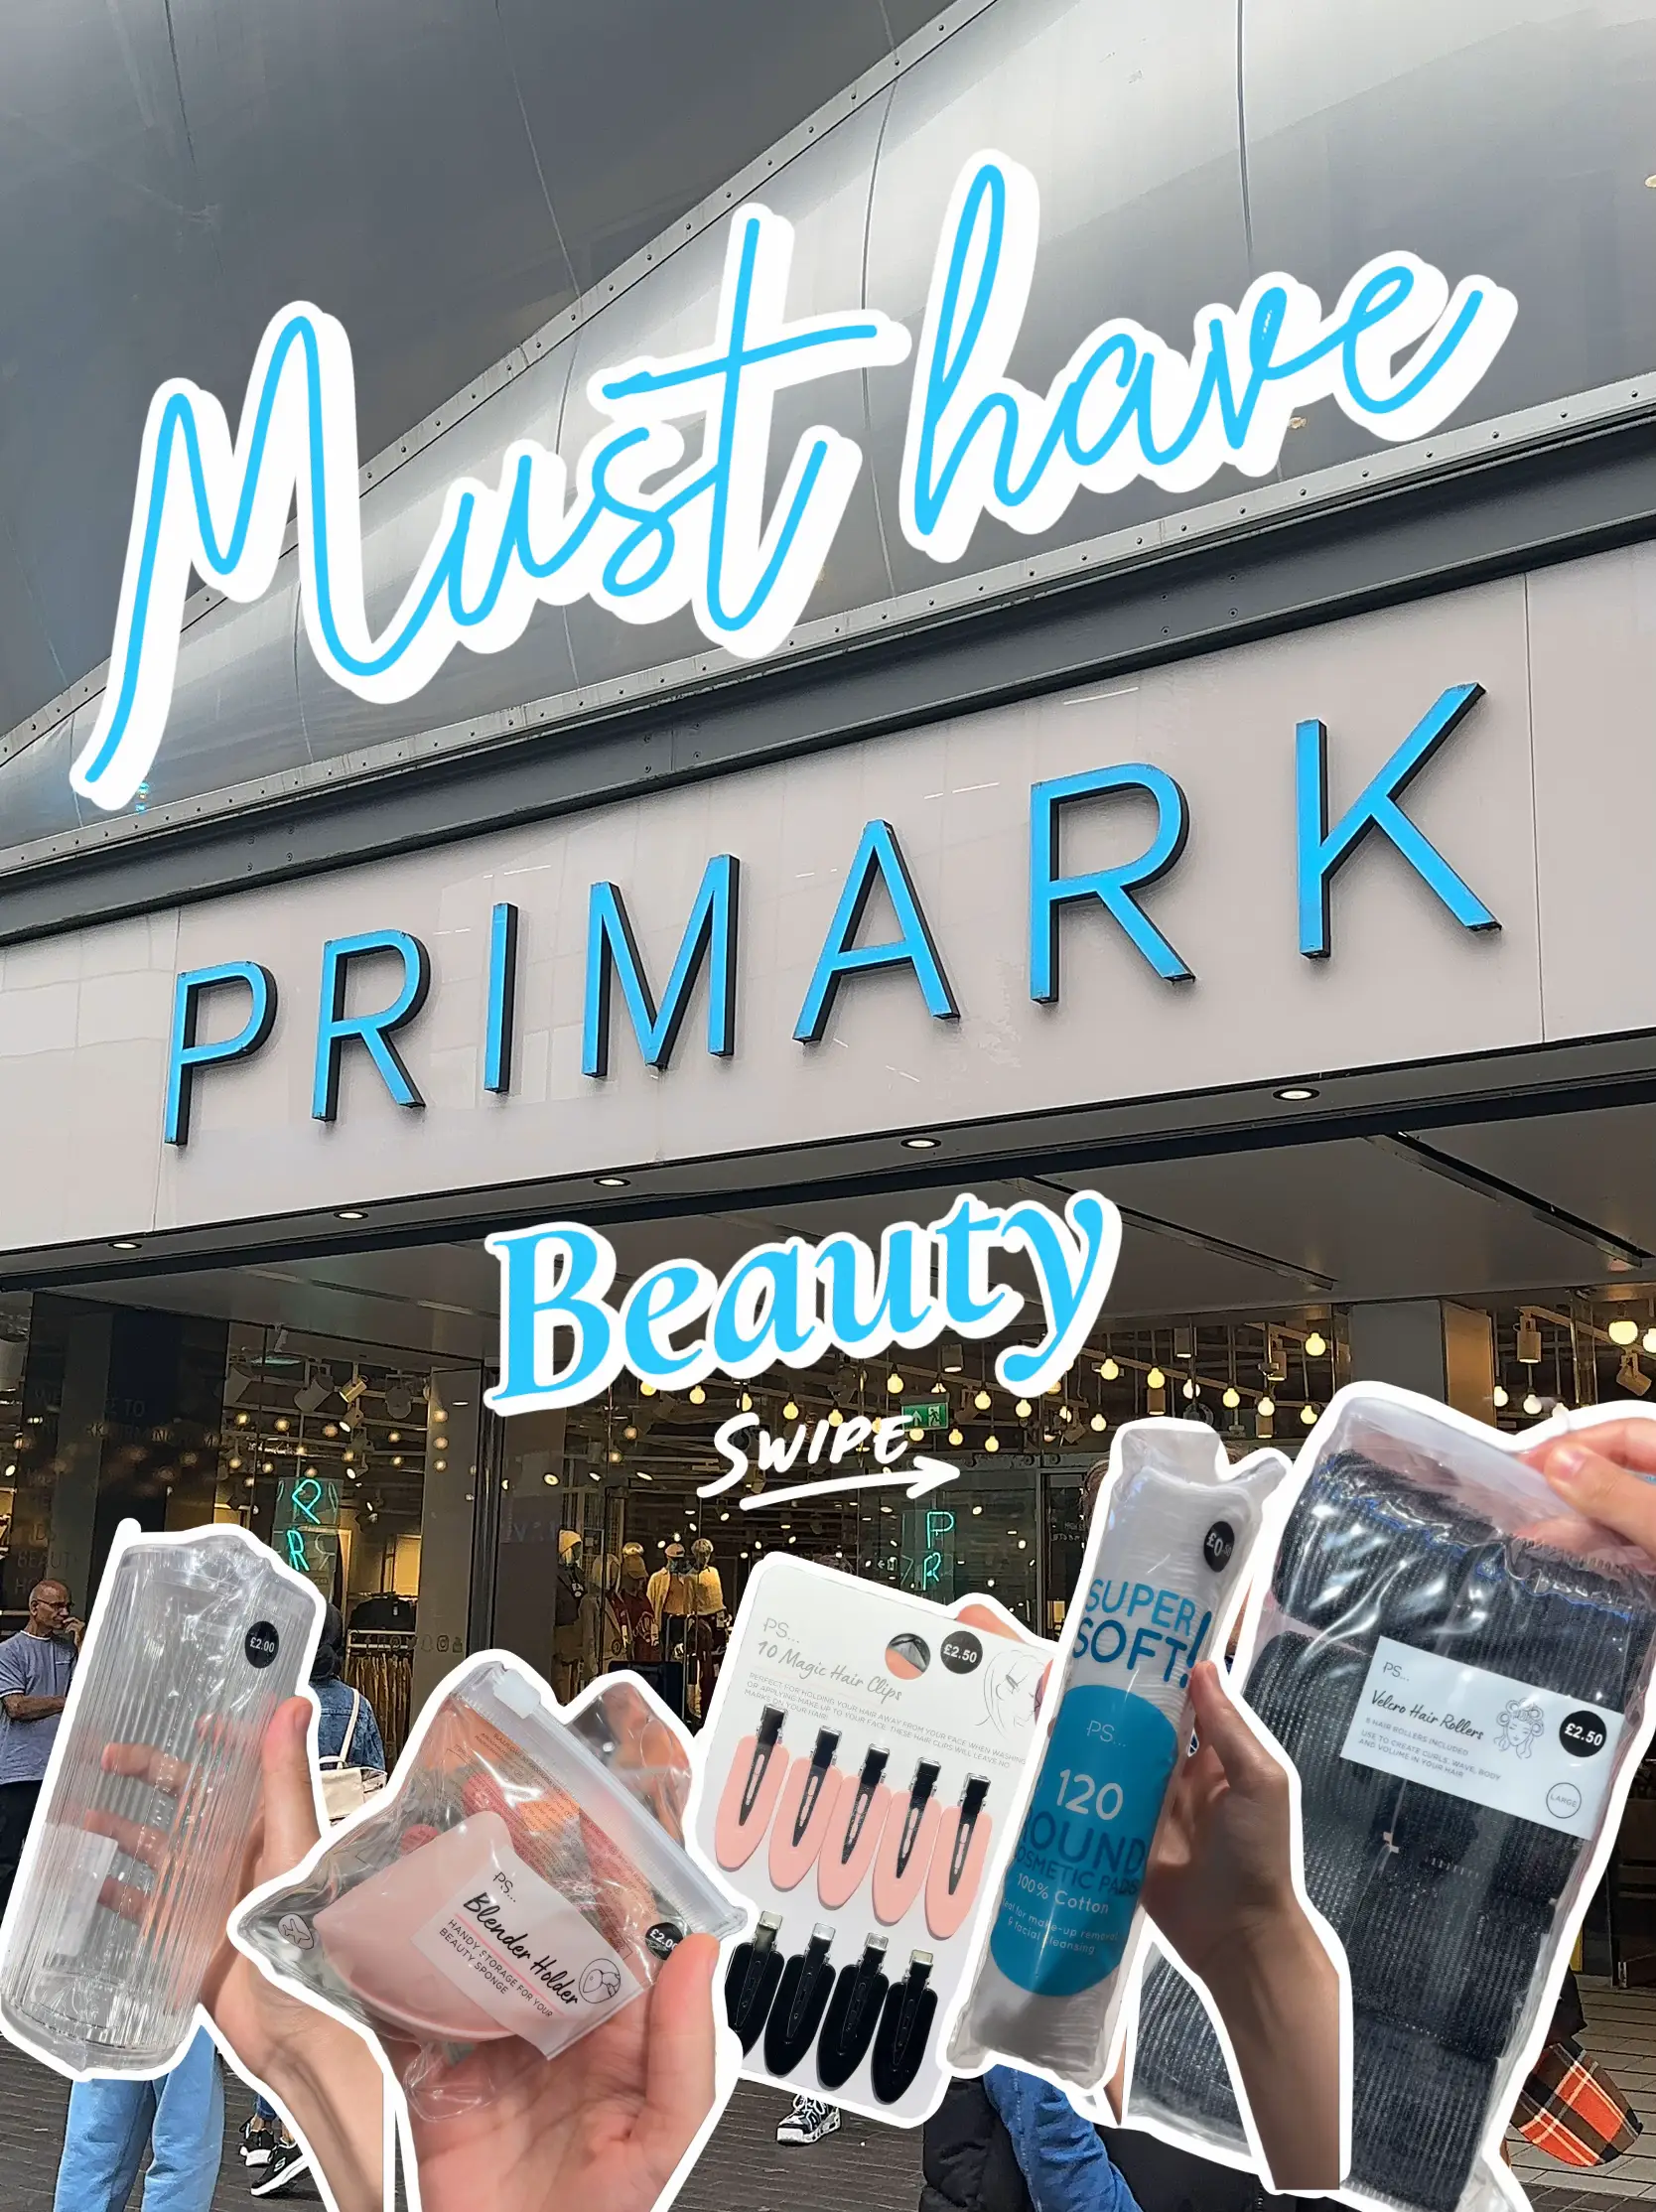 Primark fans go wild for £8 version of must-have 'it girl' Stanley